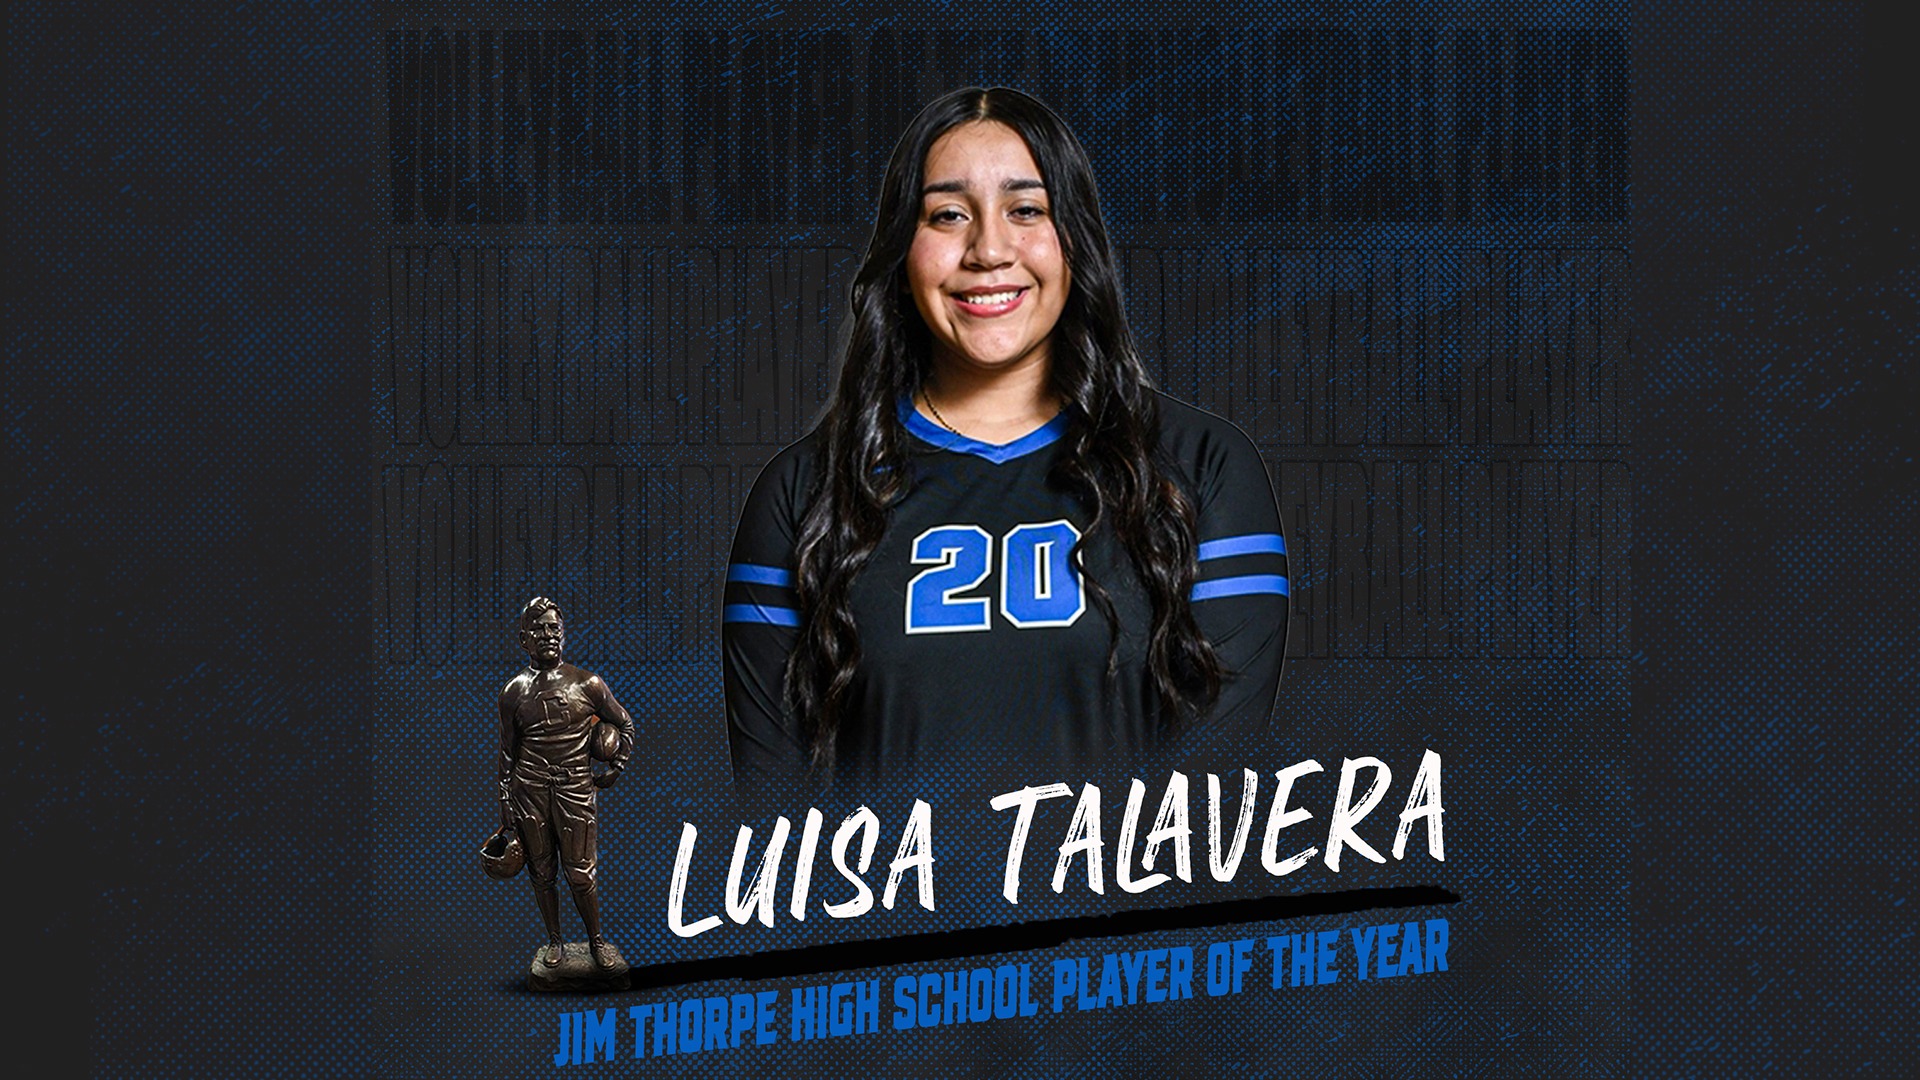 Slide 1 - Luisa Talavera Named Jim Thorpe High School Volleyball Player of the Year